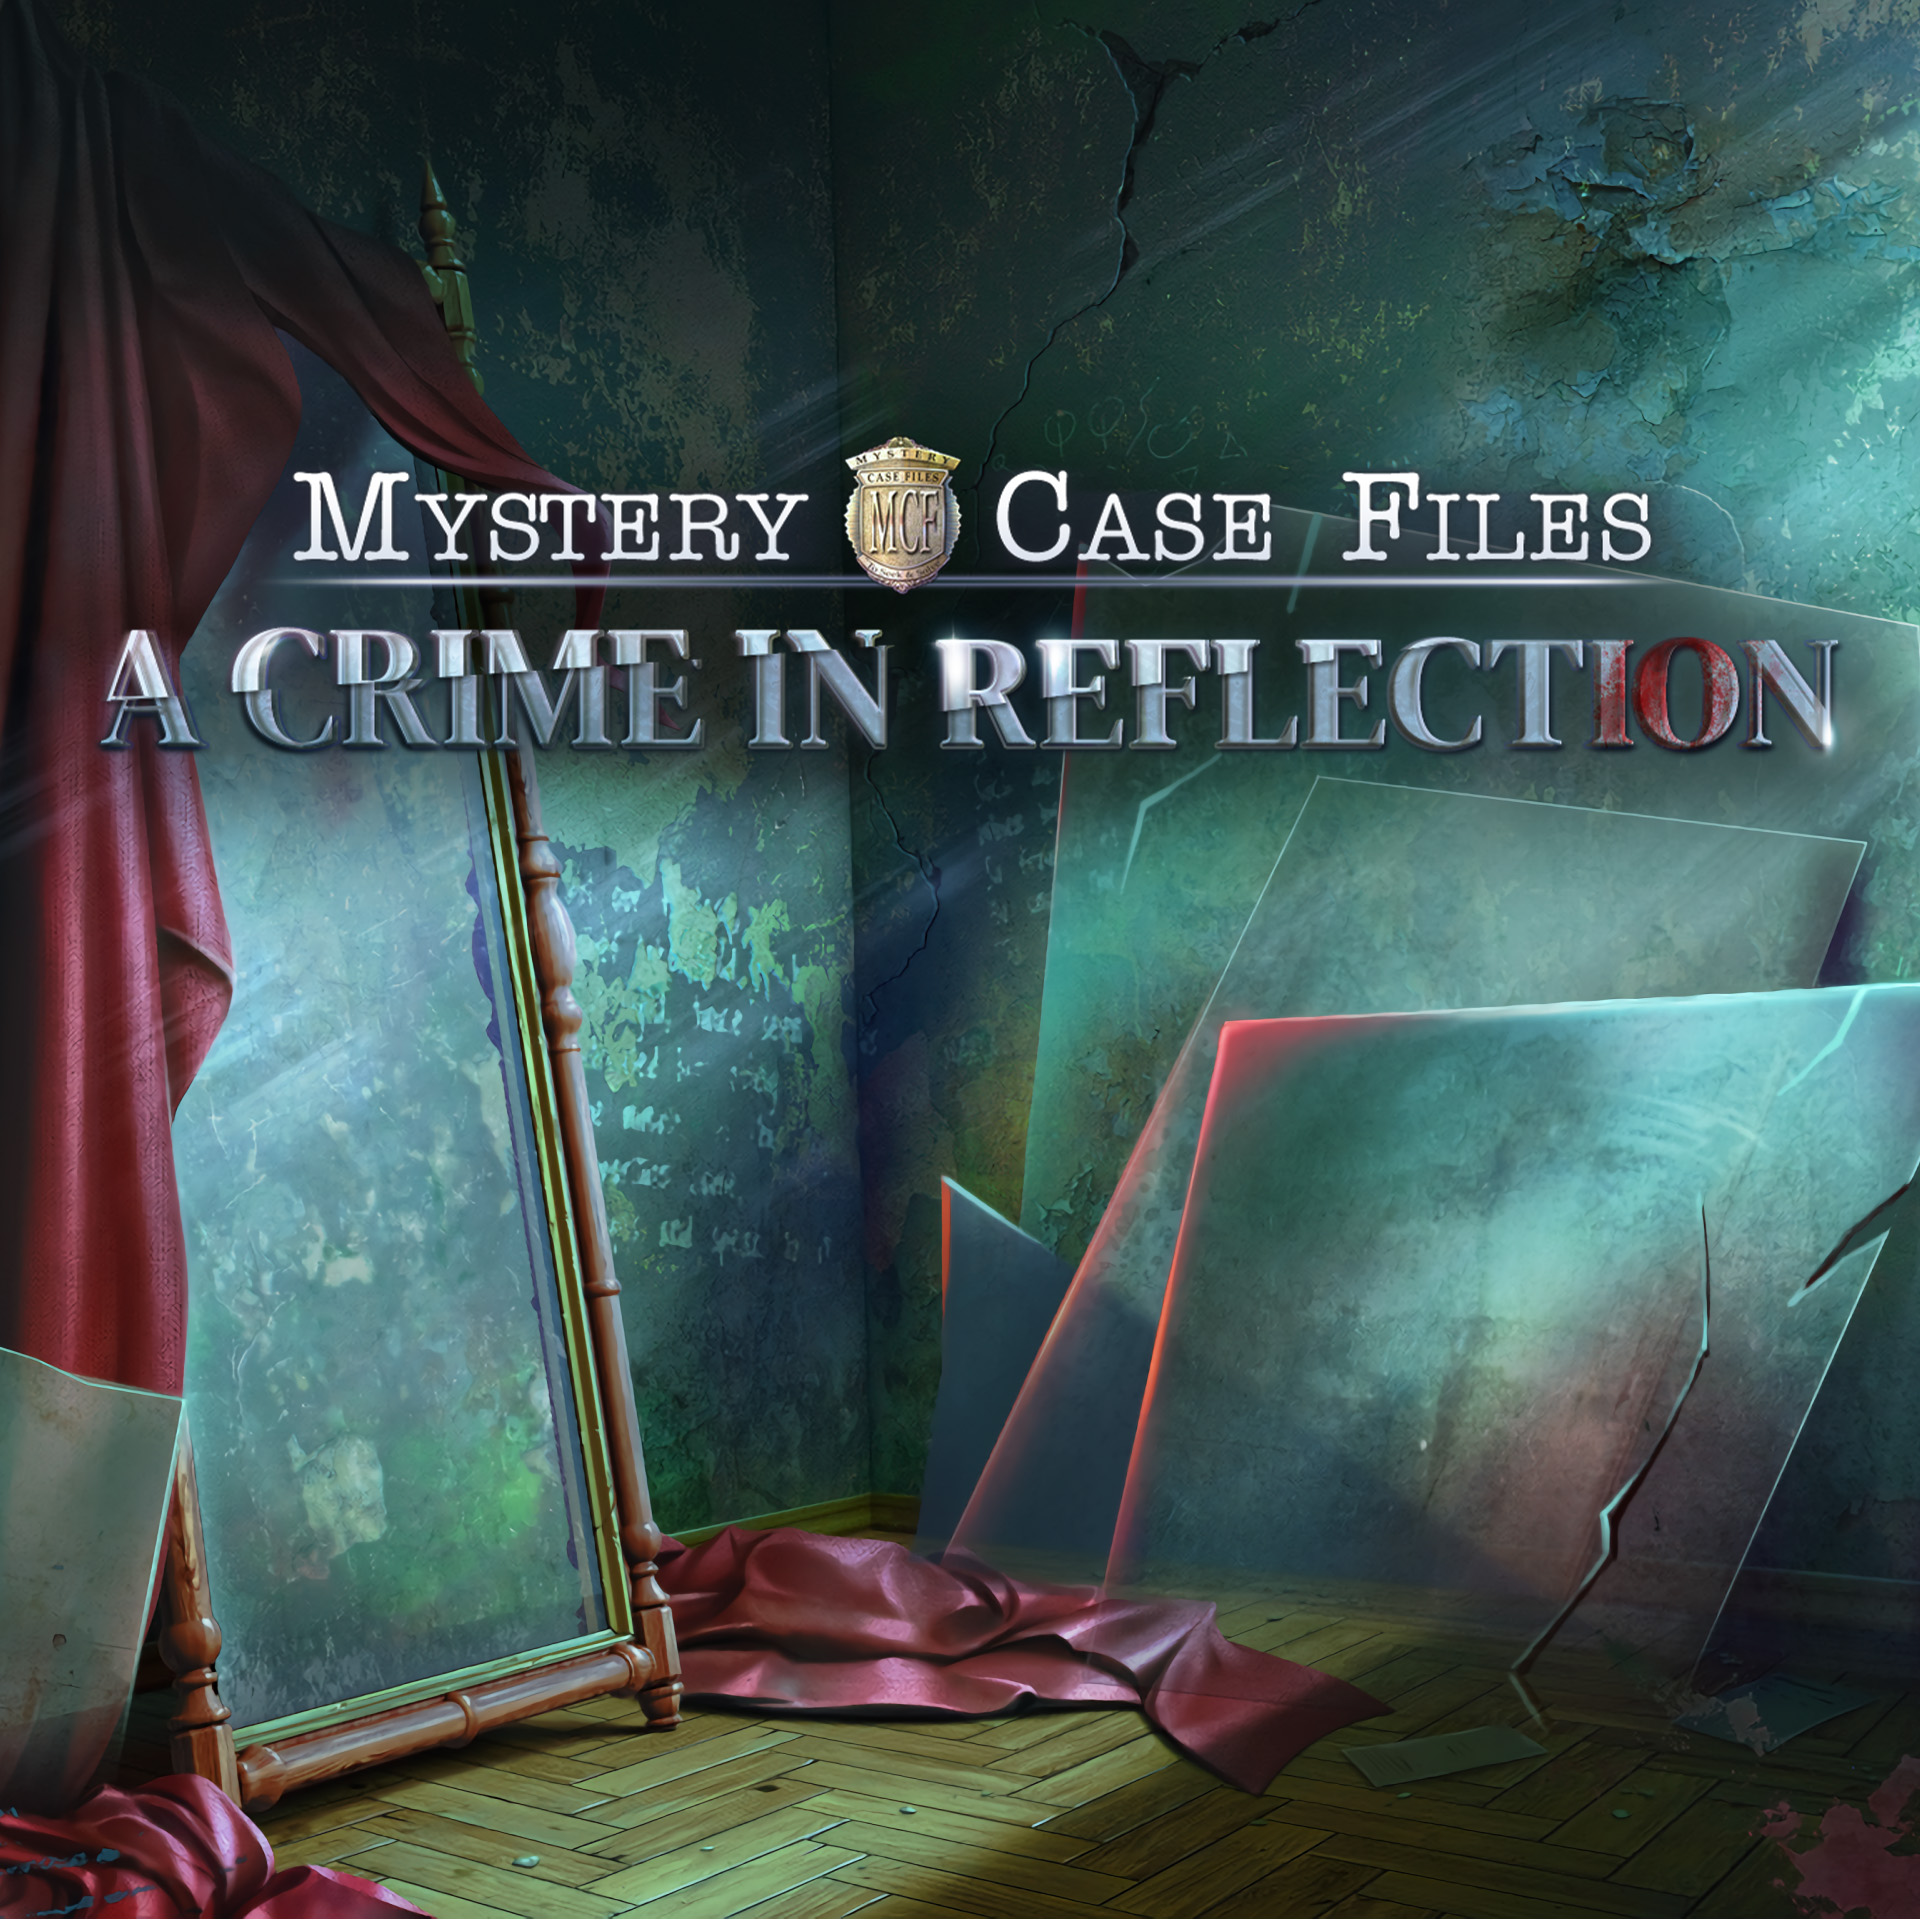 This Week's FREE game on Epic is all about Mysteries and Puzzles